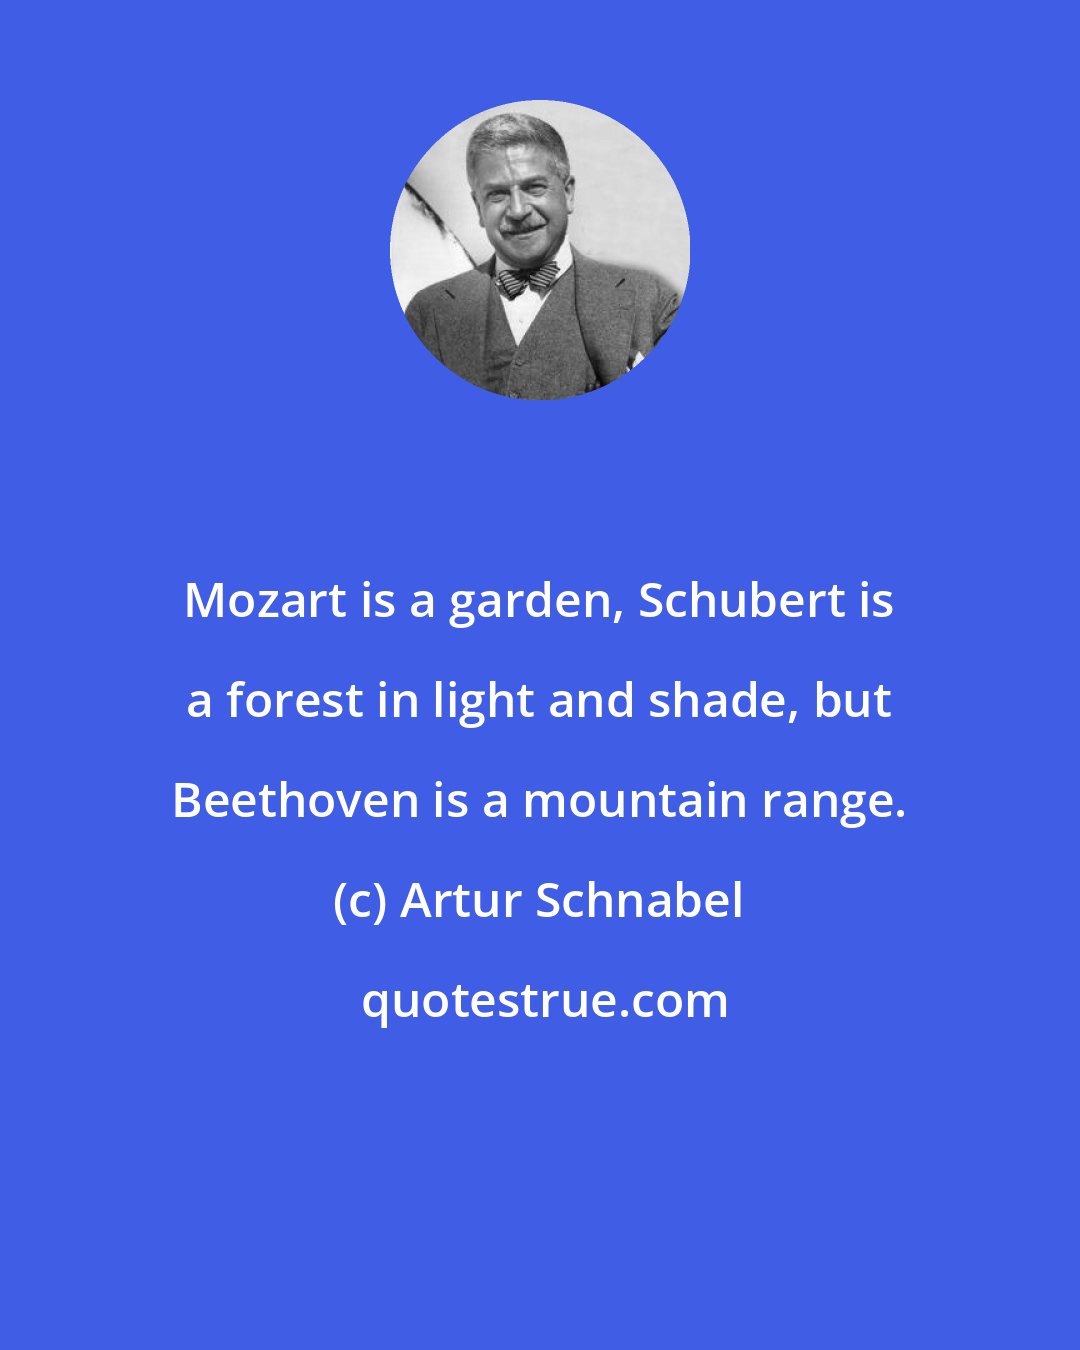 Artur Schnabel: Mozart is a garden, Schubert is a forest in light and shade, but Beethoven is a mountain range.